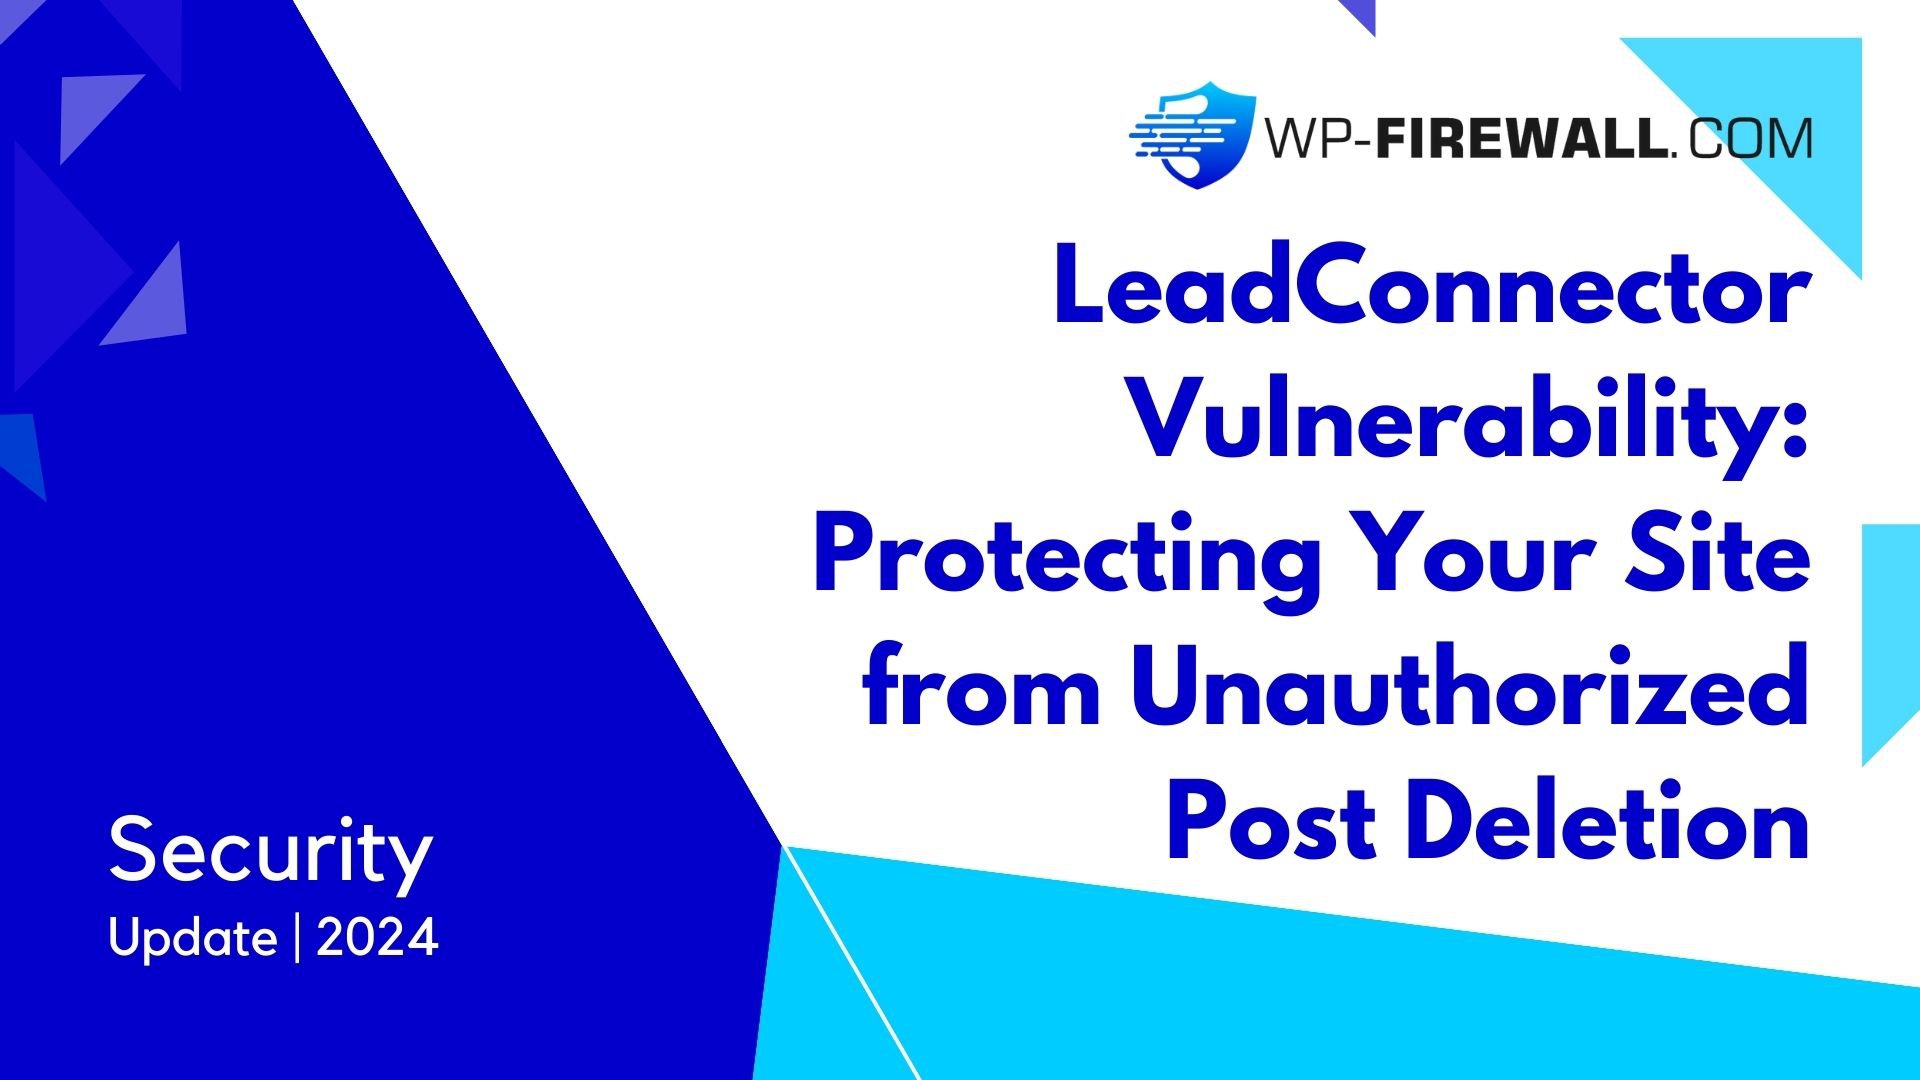 LeadConnector Vulnerability: Protecting Your Site from Unauthorized Post Deletion cover